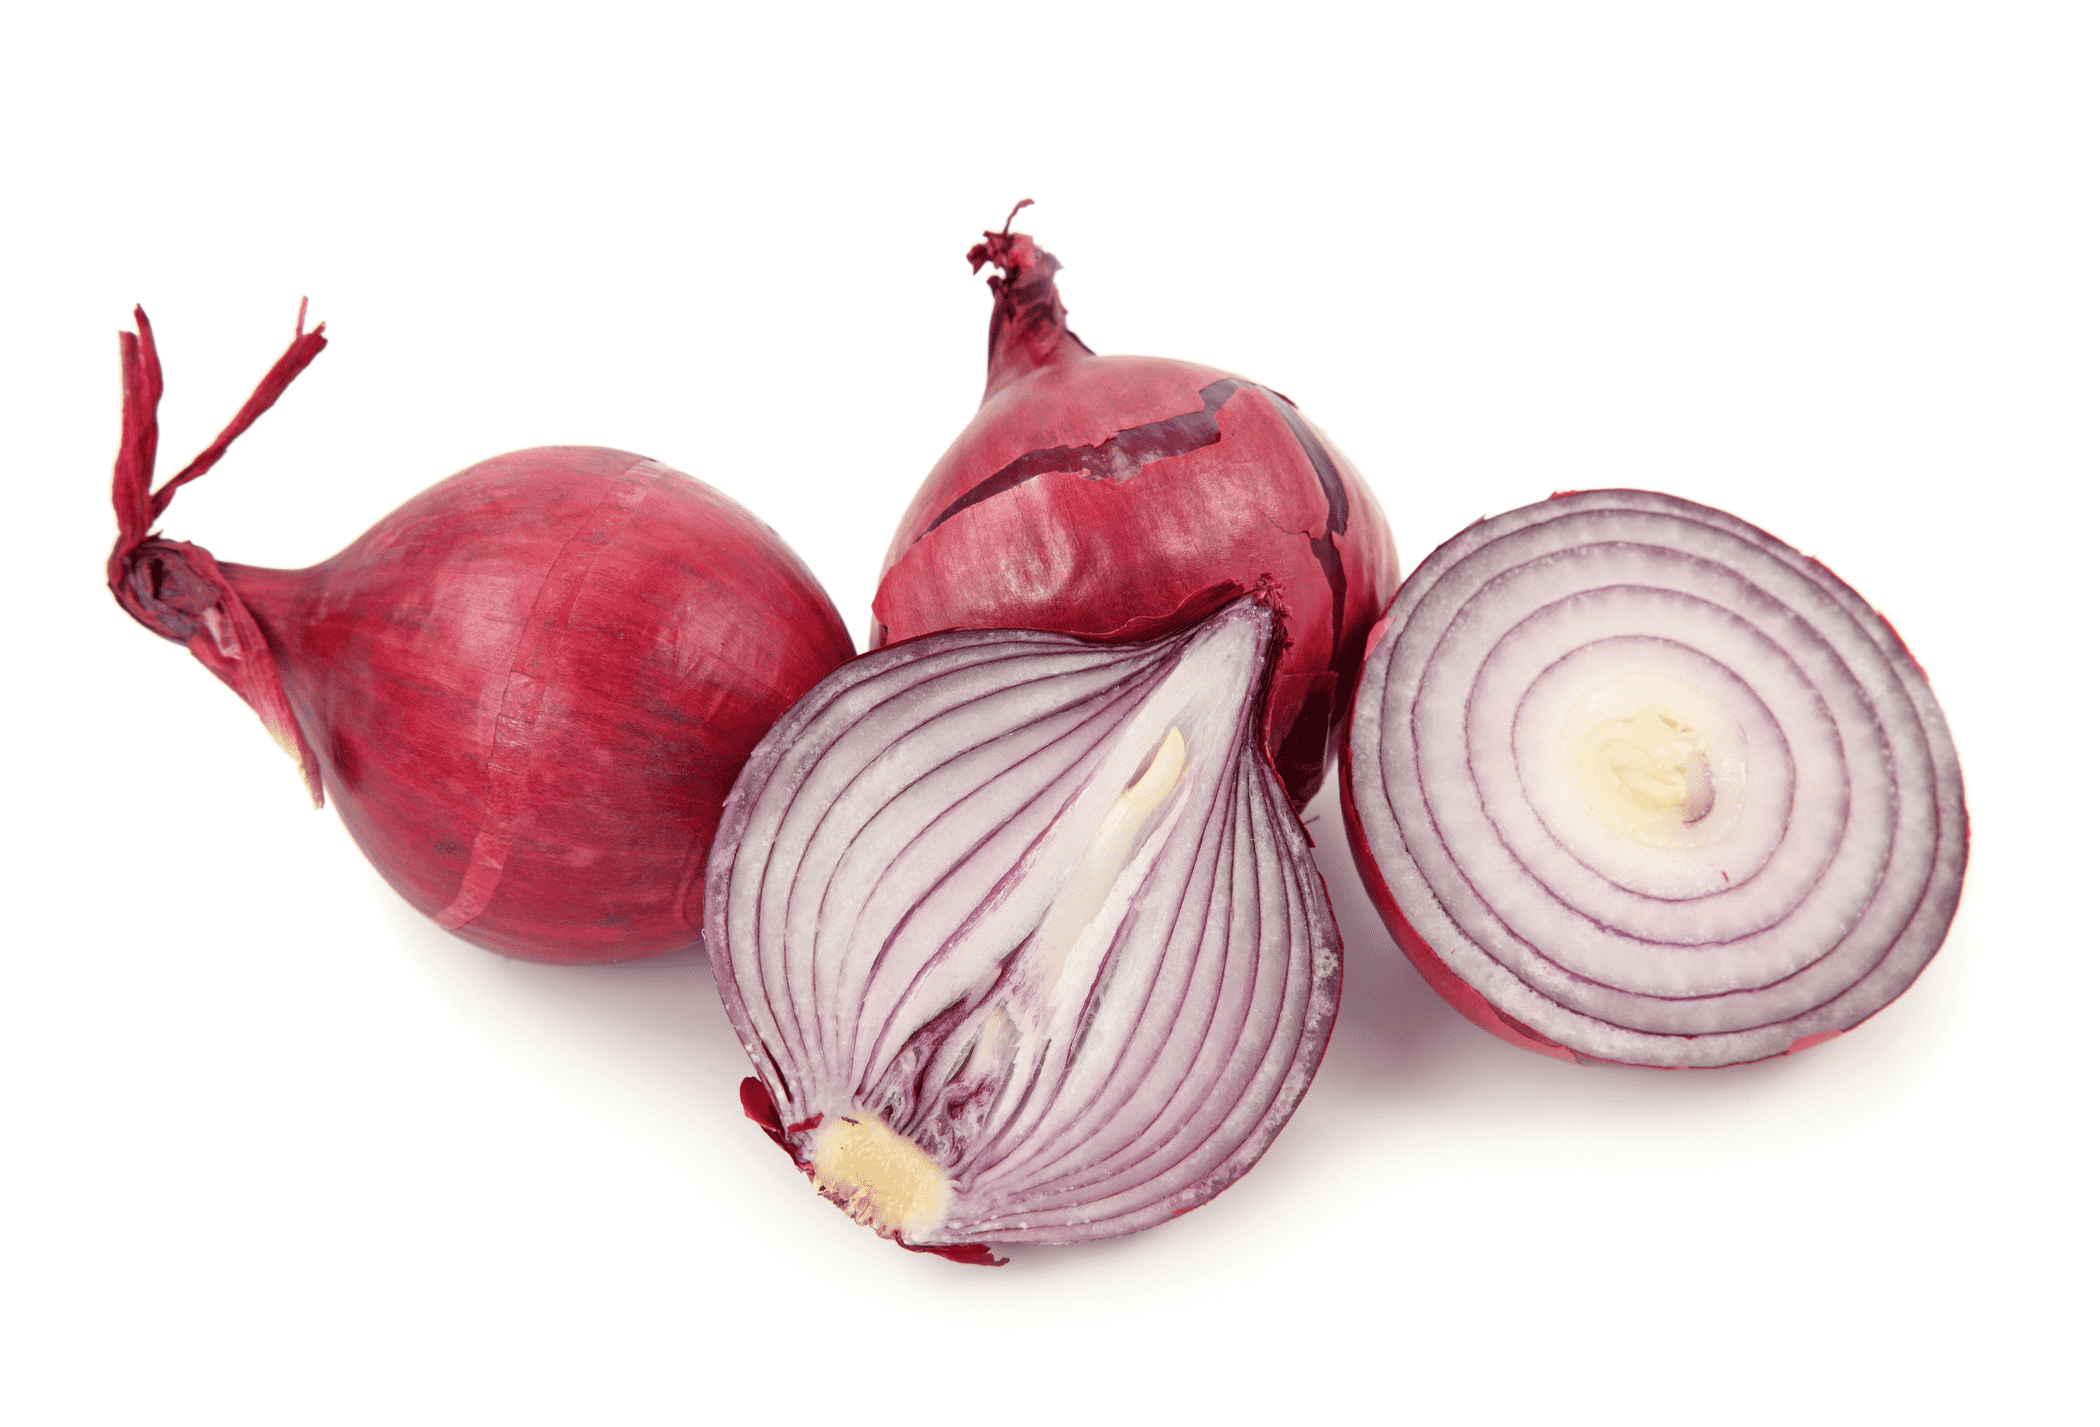 Red onion ca900g-1000g Netherlands，price per package